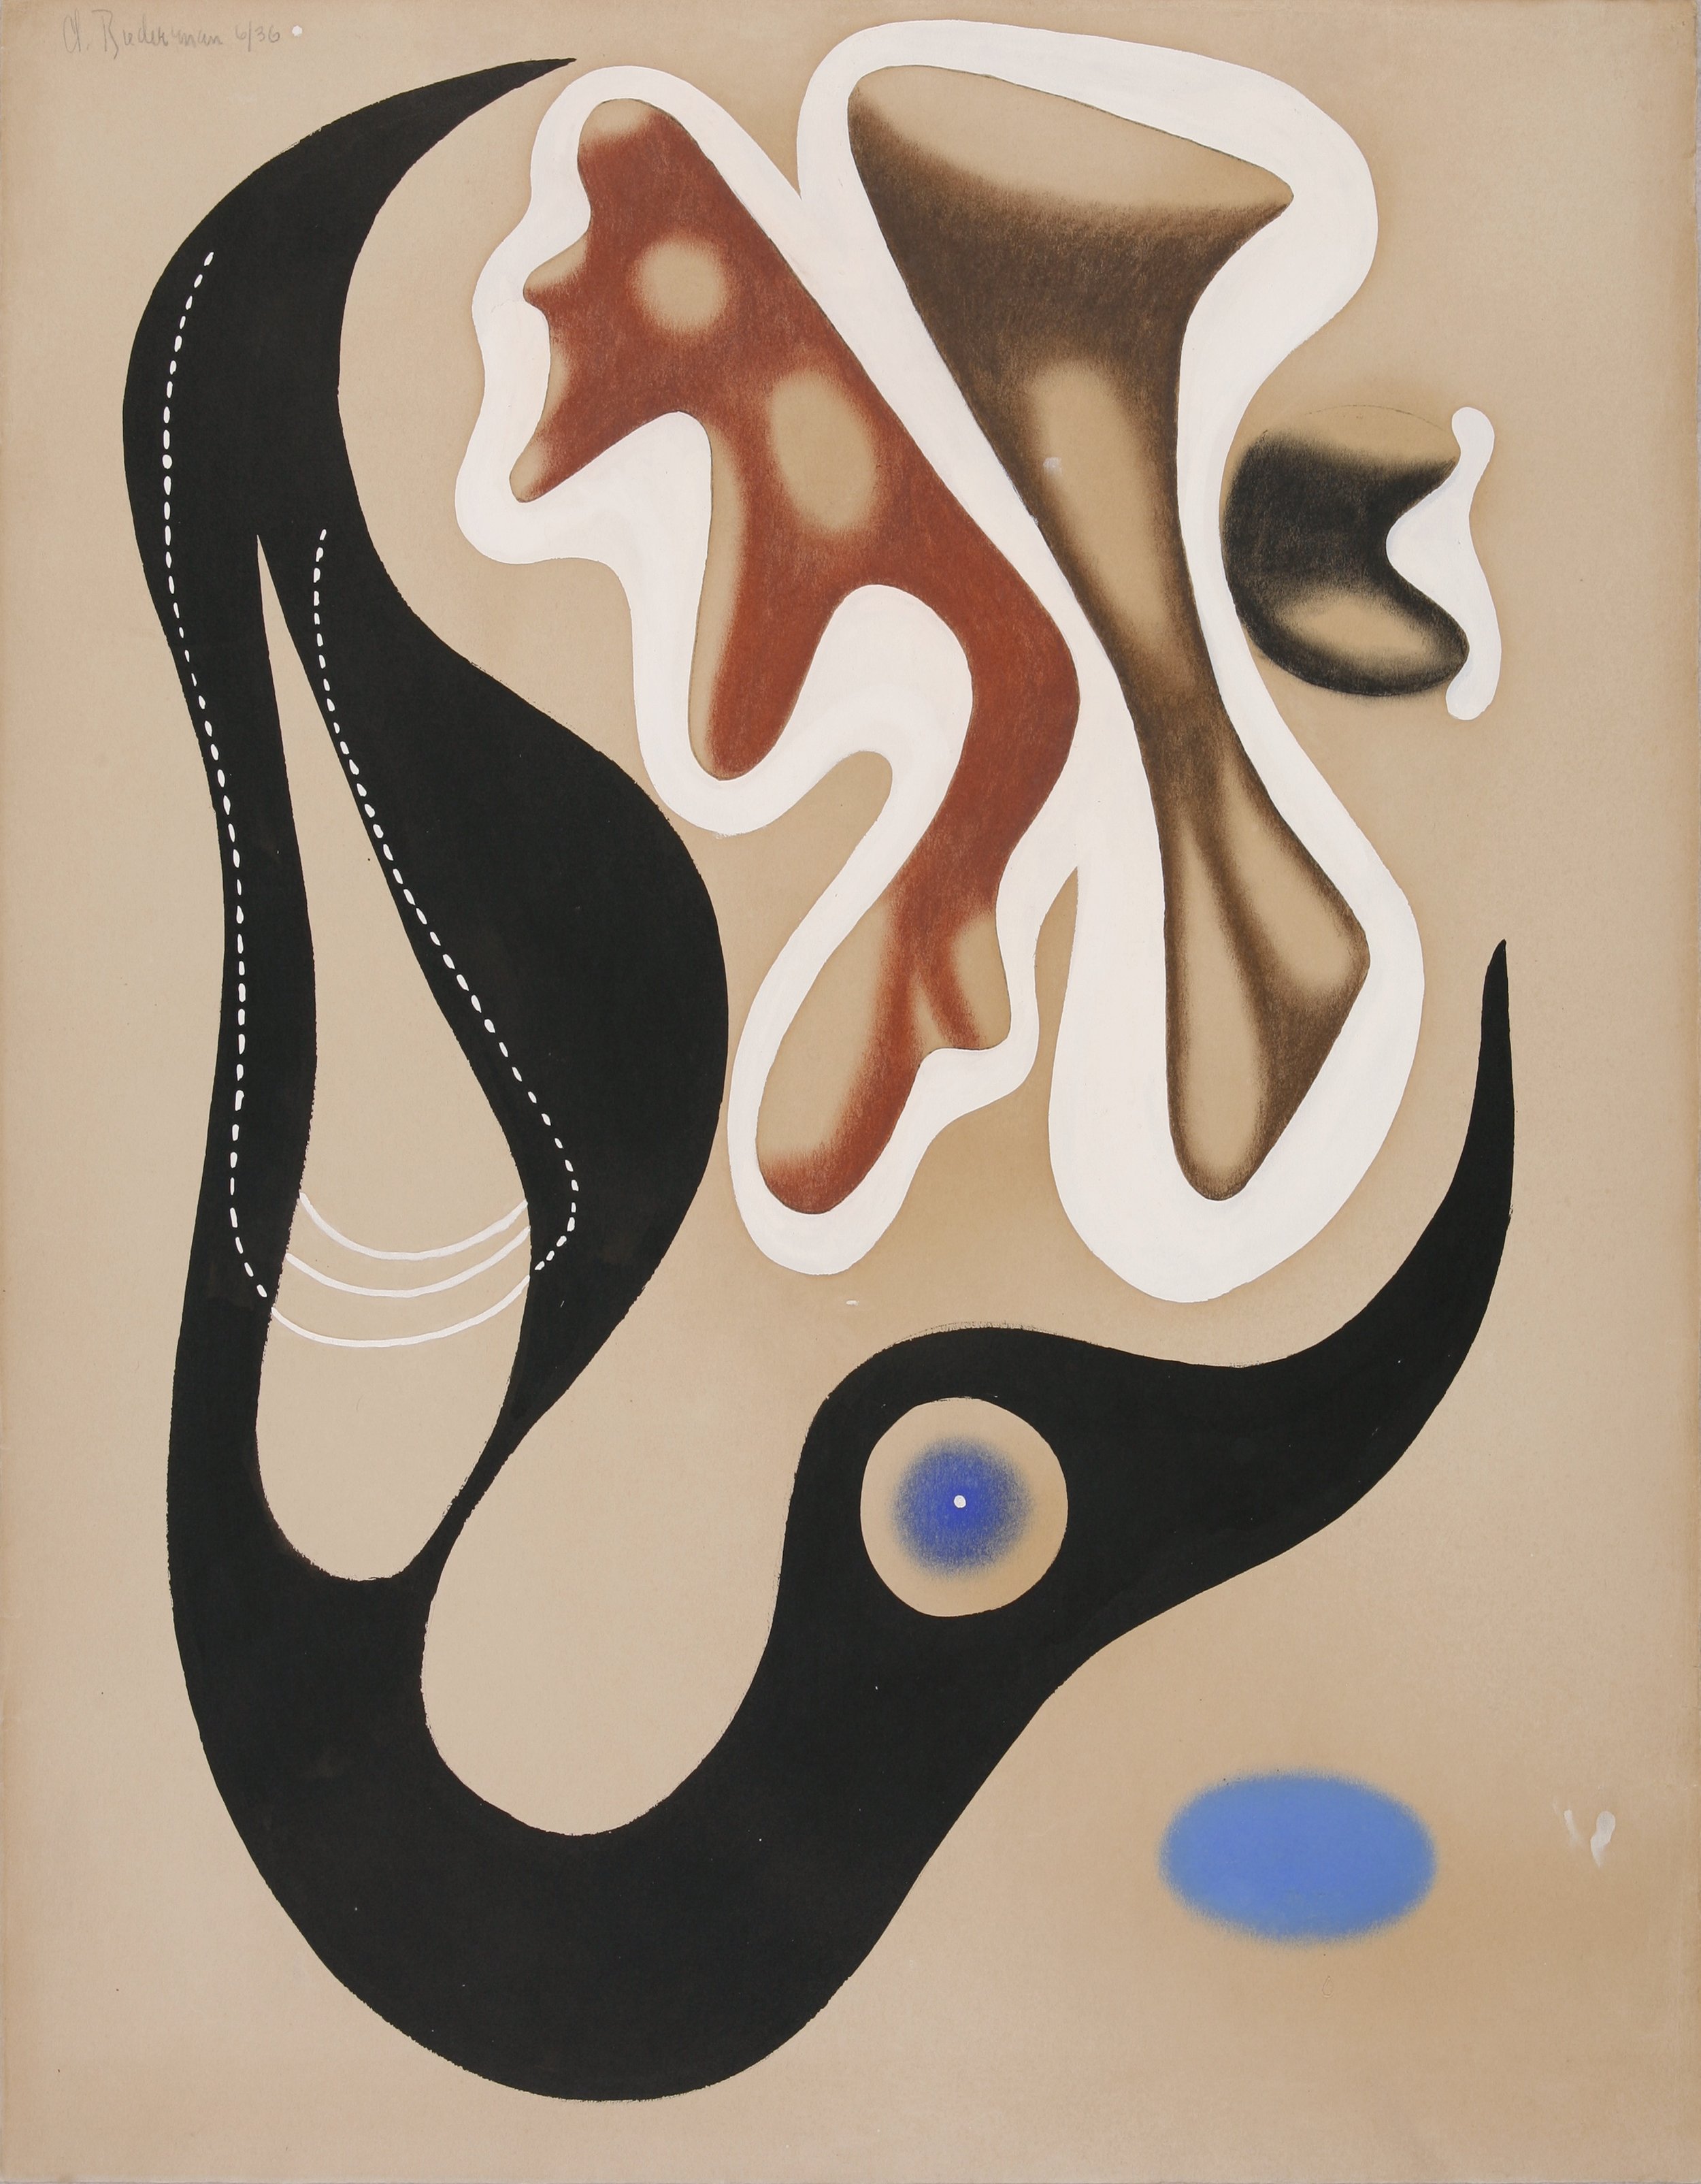 Biederman and Surrealism: Use It, Abuse it, Lose it &lt;alt: Biomorphic abstract work on paper of floating shapes in black, brown, white, and blue &lt;/&gt;